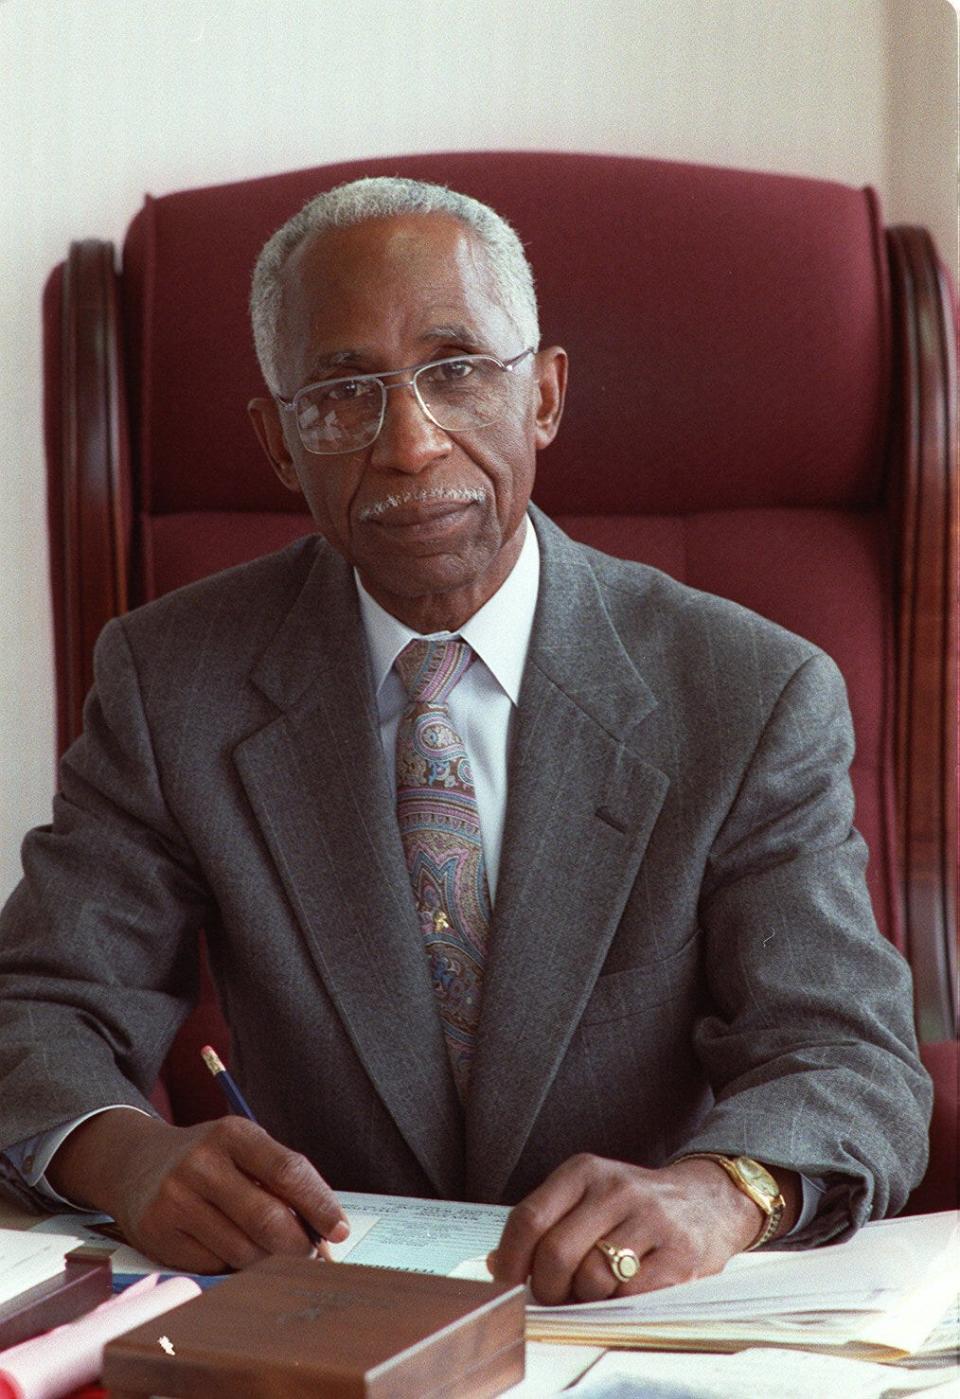 The Rev. Leon Troy Sr. served as the pastor of Second Baptist Church for 20 years. He's pictured here in 1996.